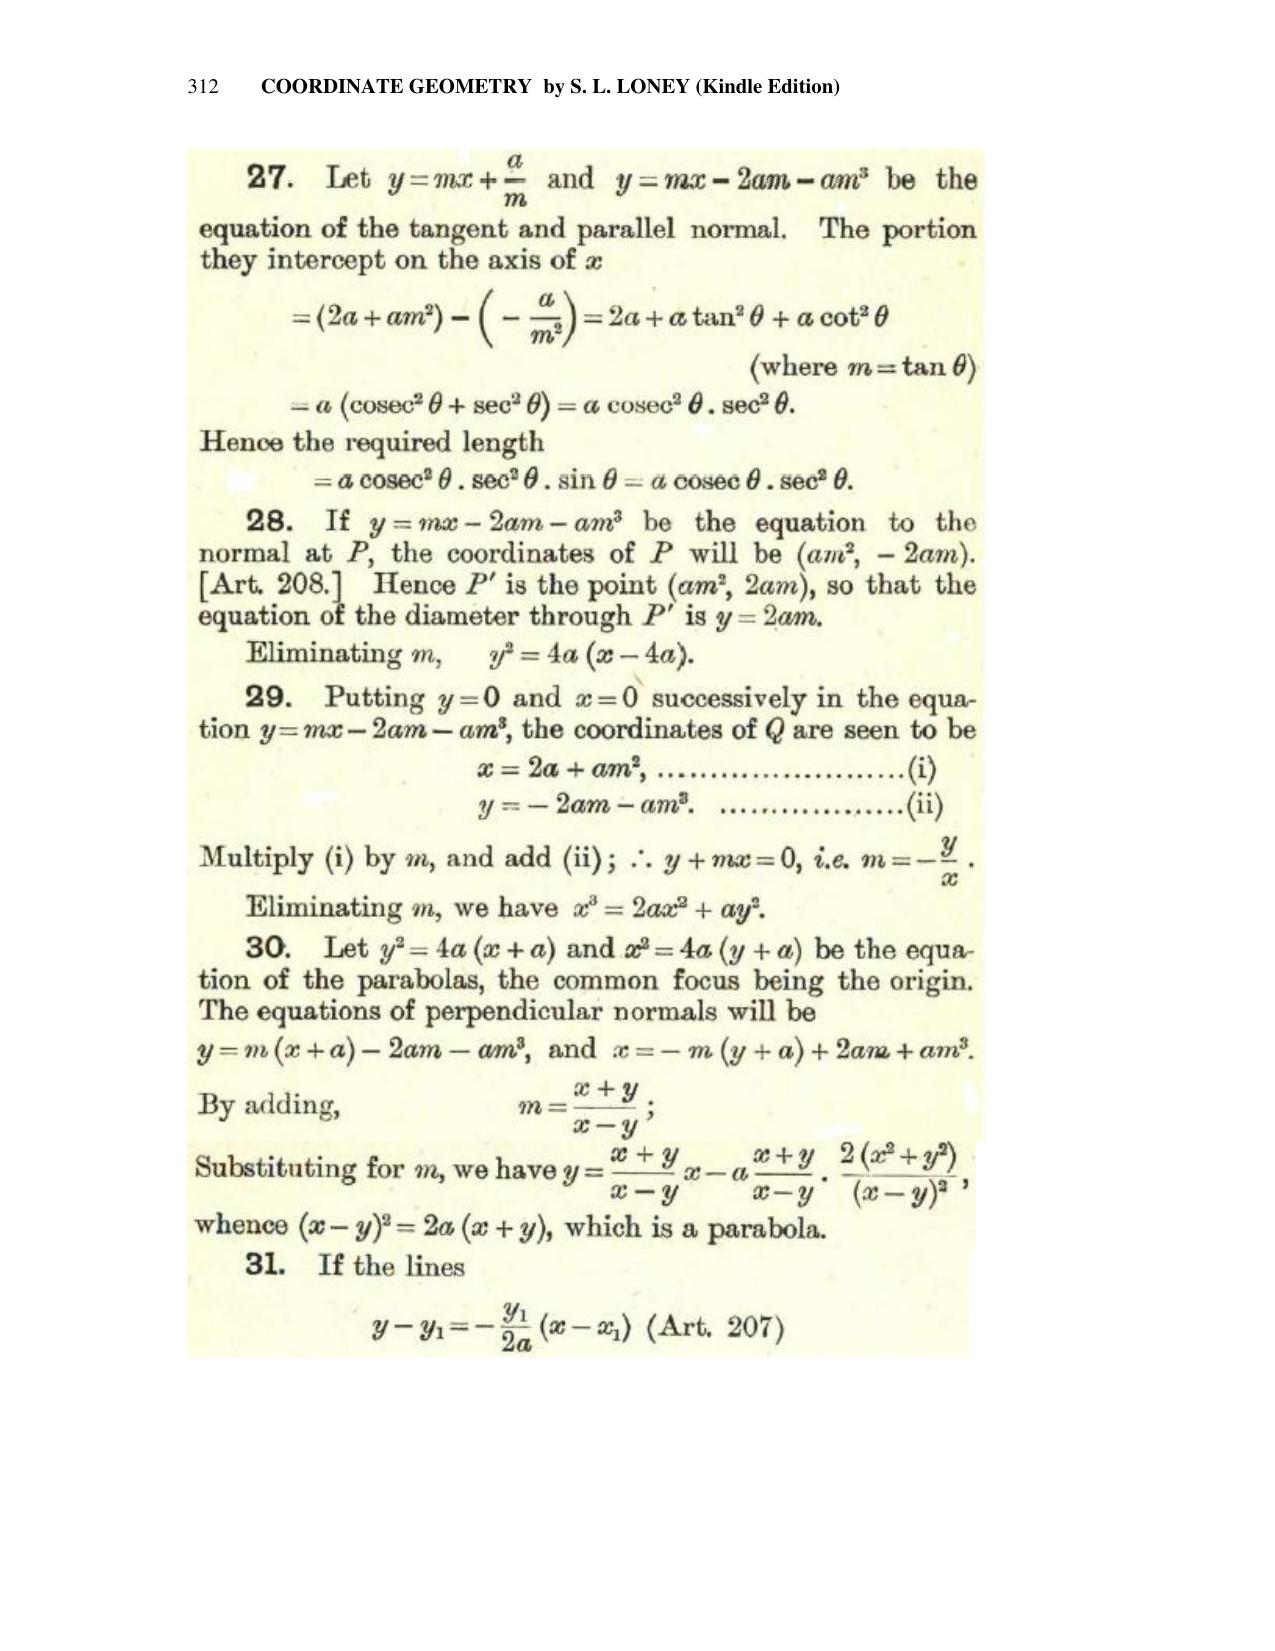 Chapter 10: The Parabola - SL Loney Solutions: The Elements of Coordinate Geometry - Page 26